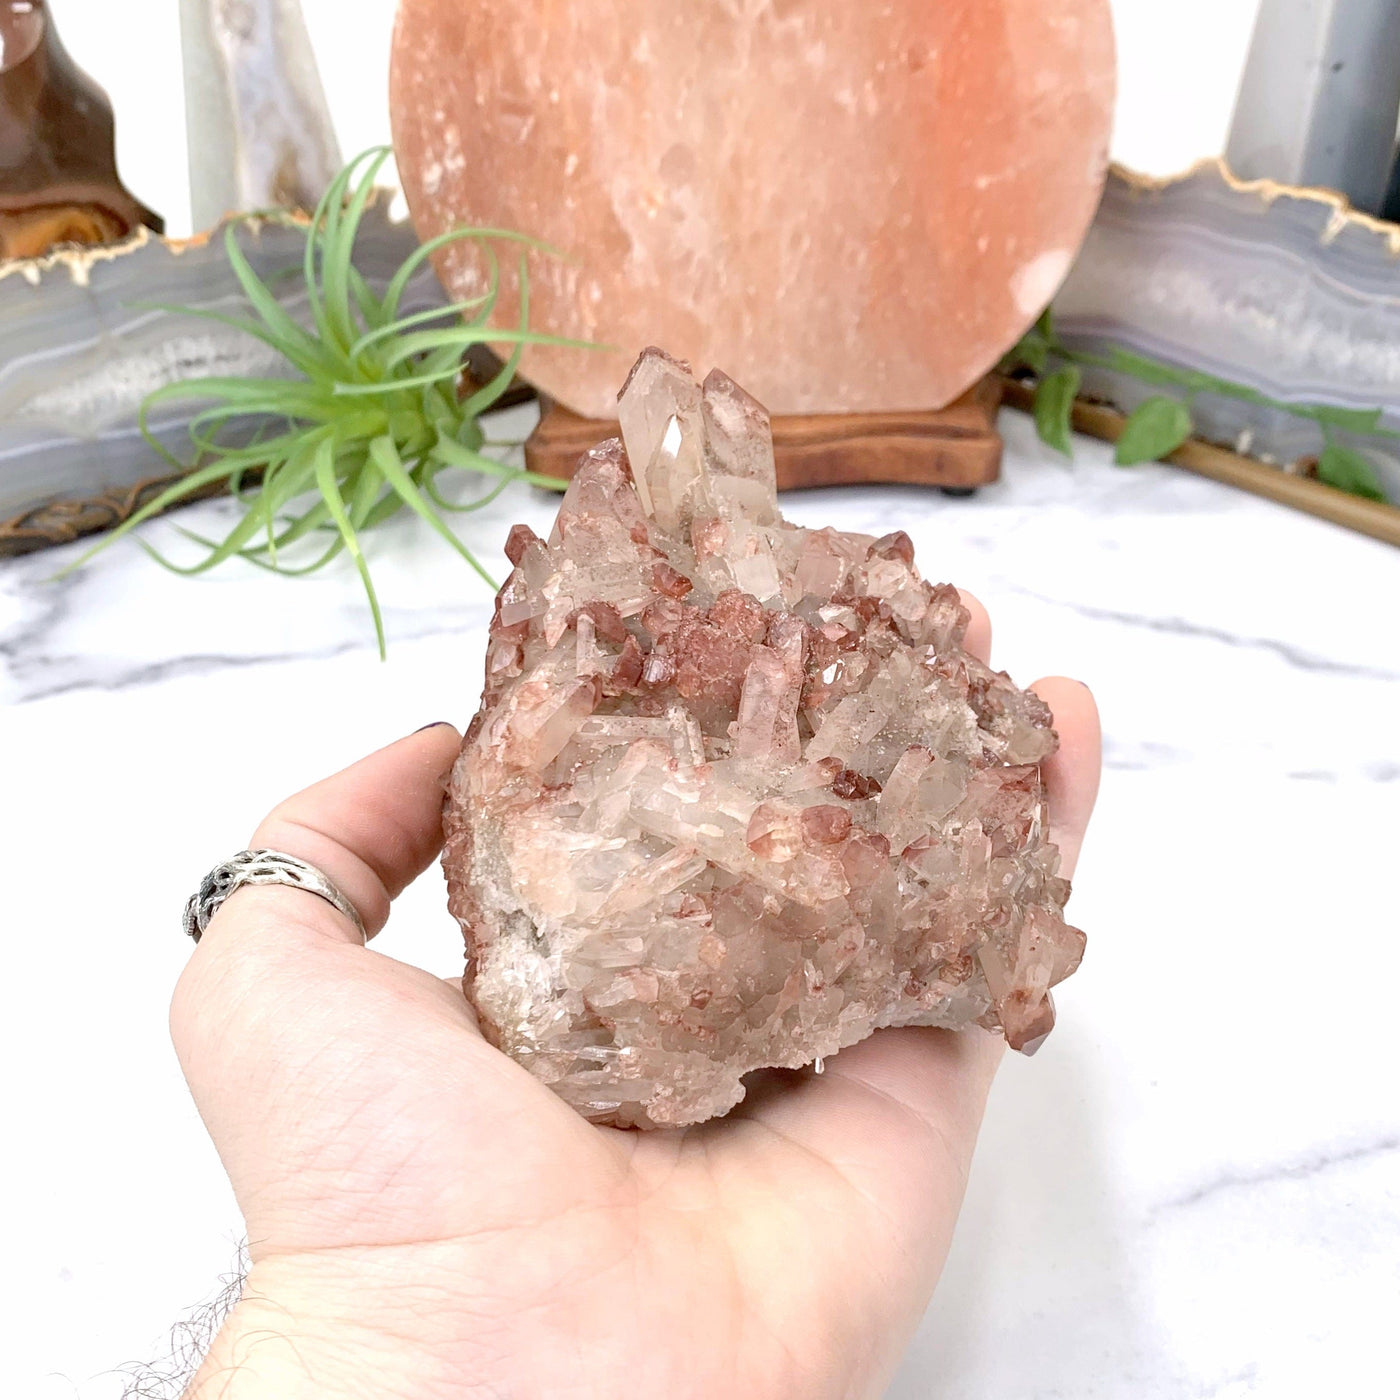 LITHIUM QUARTZ IN HAND WITH MARBLE BACKGROUND